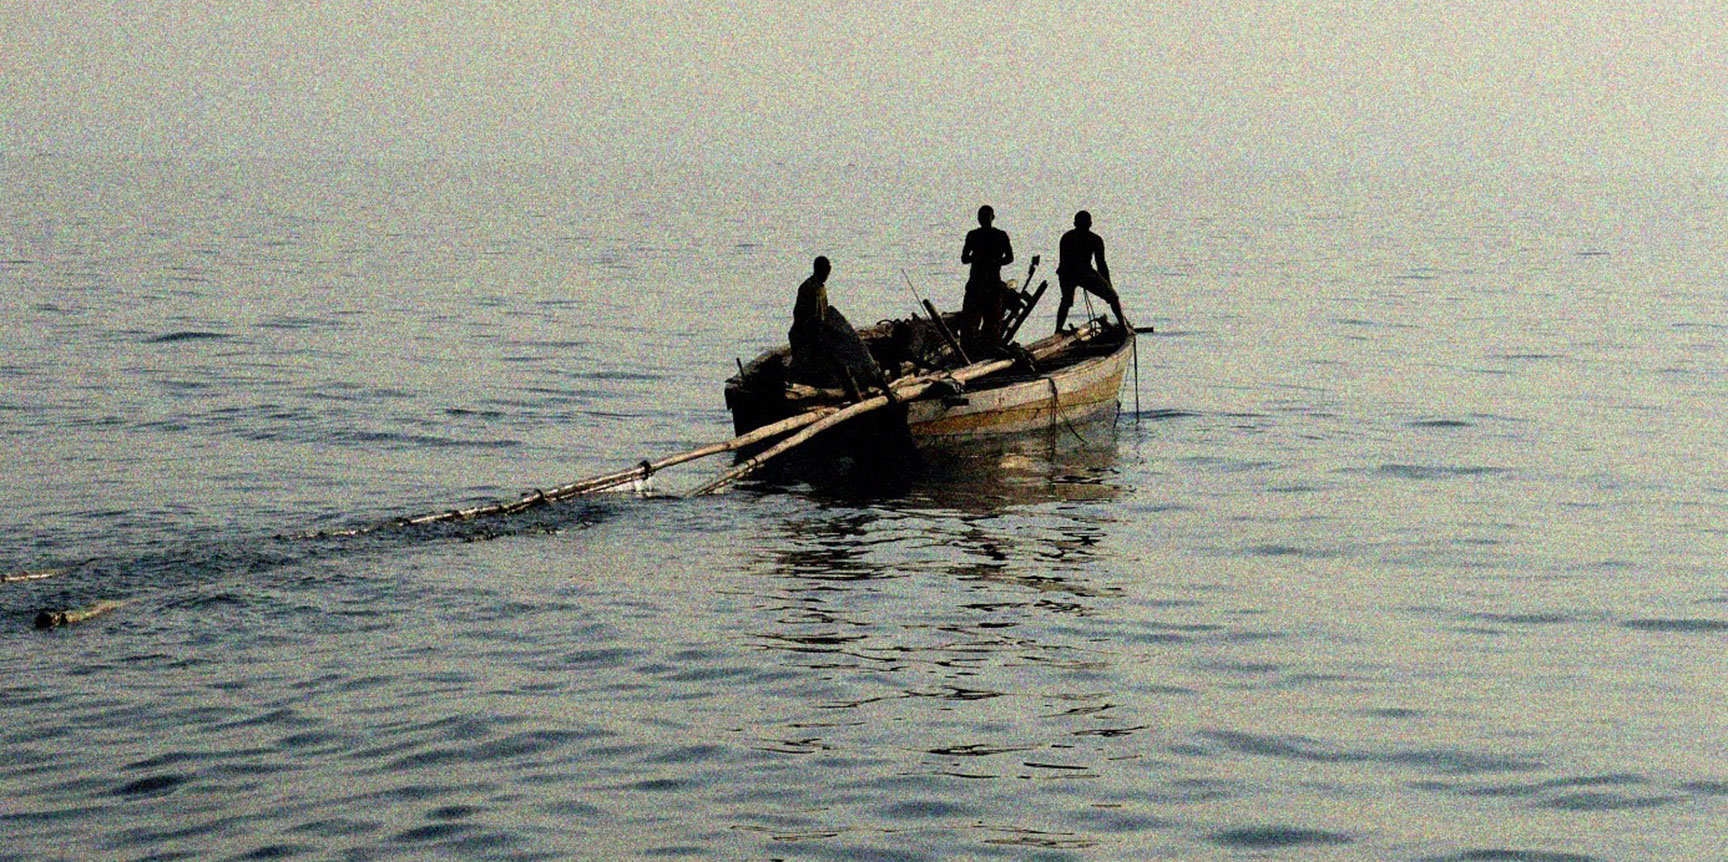 Fishermen at Lake Tanganyika heading out into the open waters in the evening for casting their nets (© Benedikt Ehrenfels).